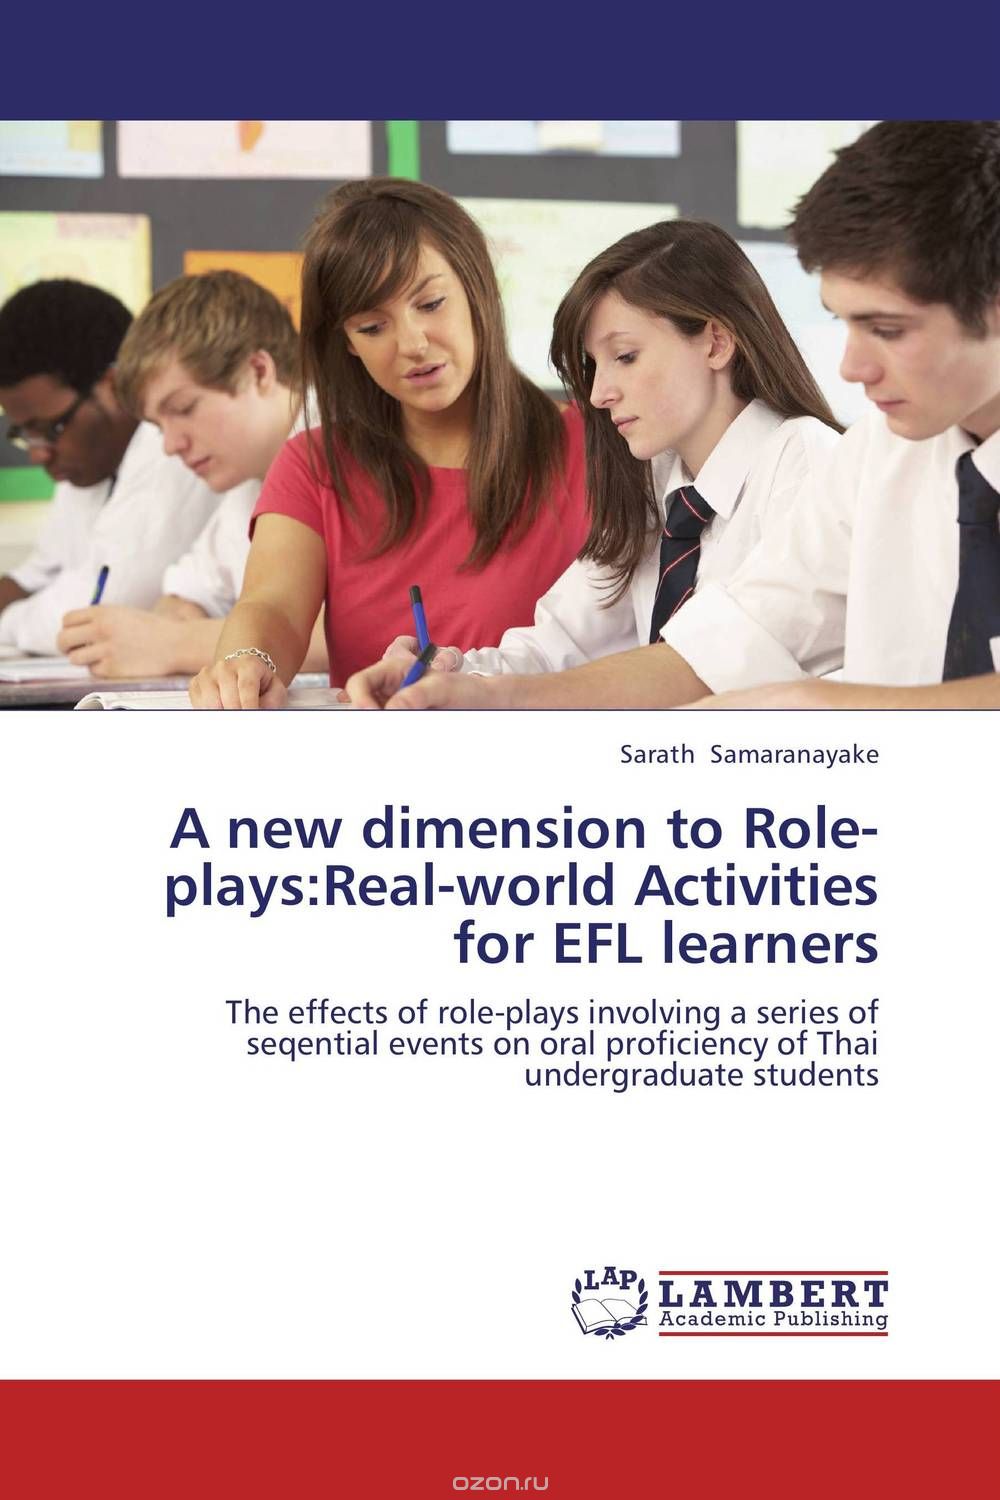 Скачать книгу "A new dimension to Role-plays:Real-world Activities for EFL learners"